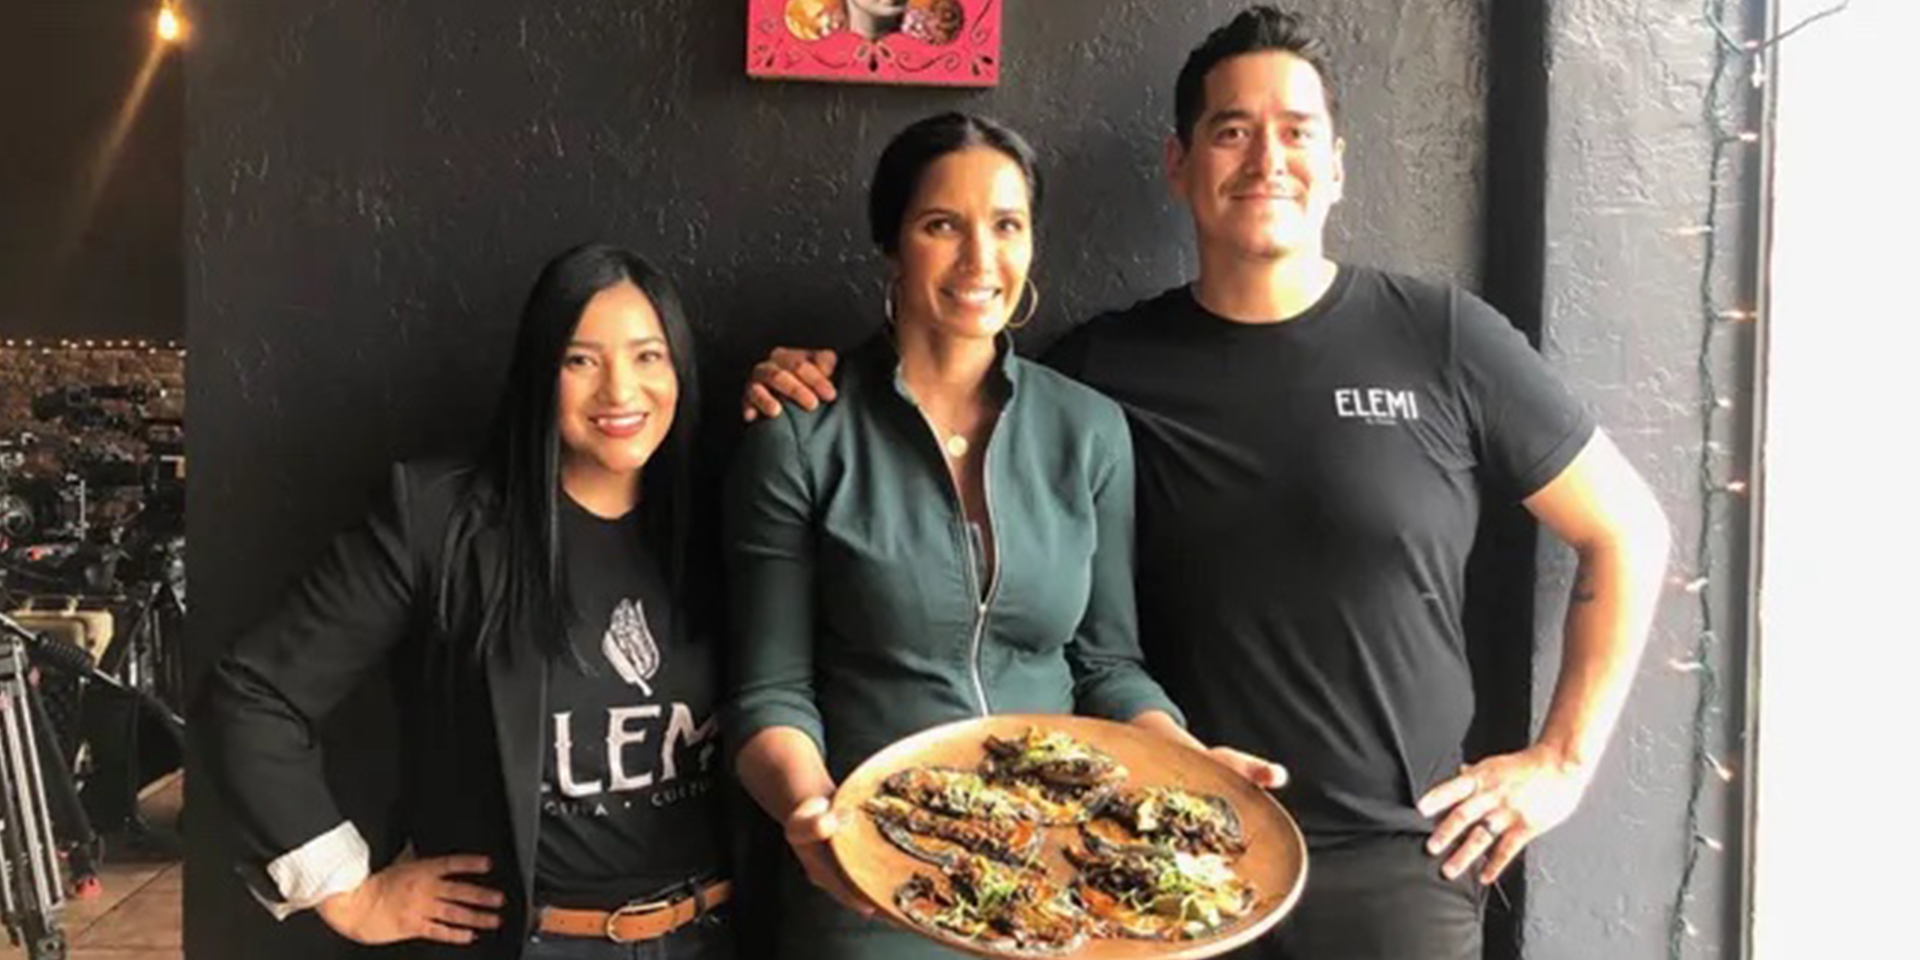 Smiling people standing in front of a black wall holding a plate with tacos.